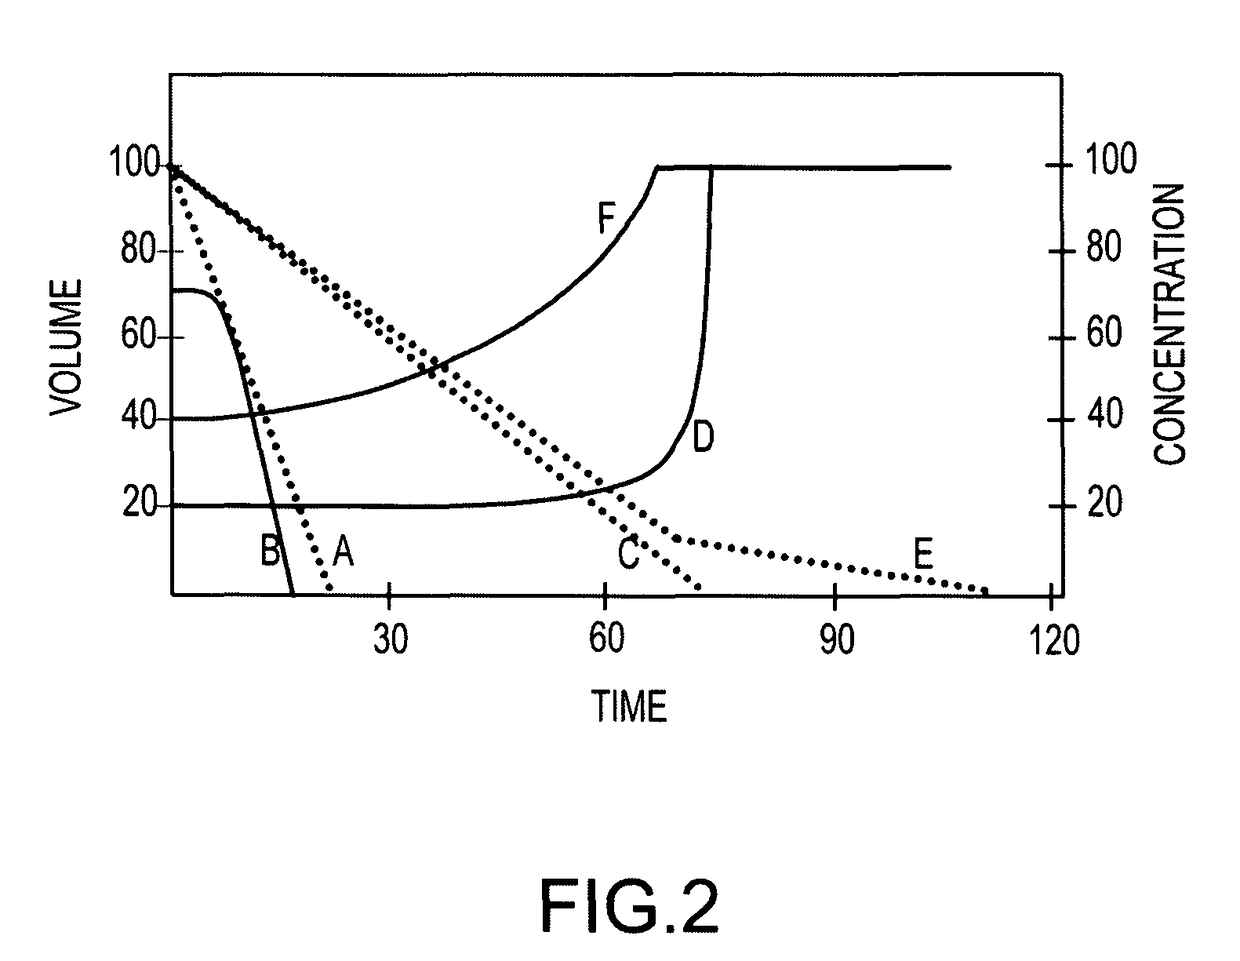 Differential evaporation potentiated disinfectant system